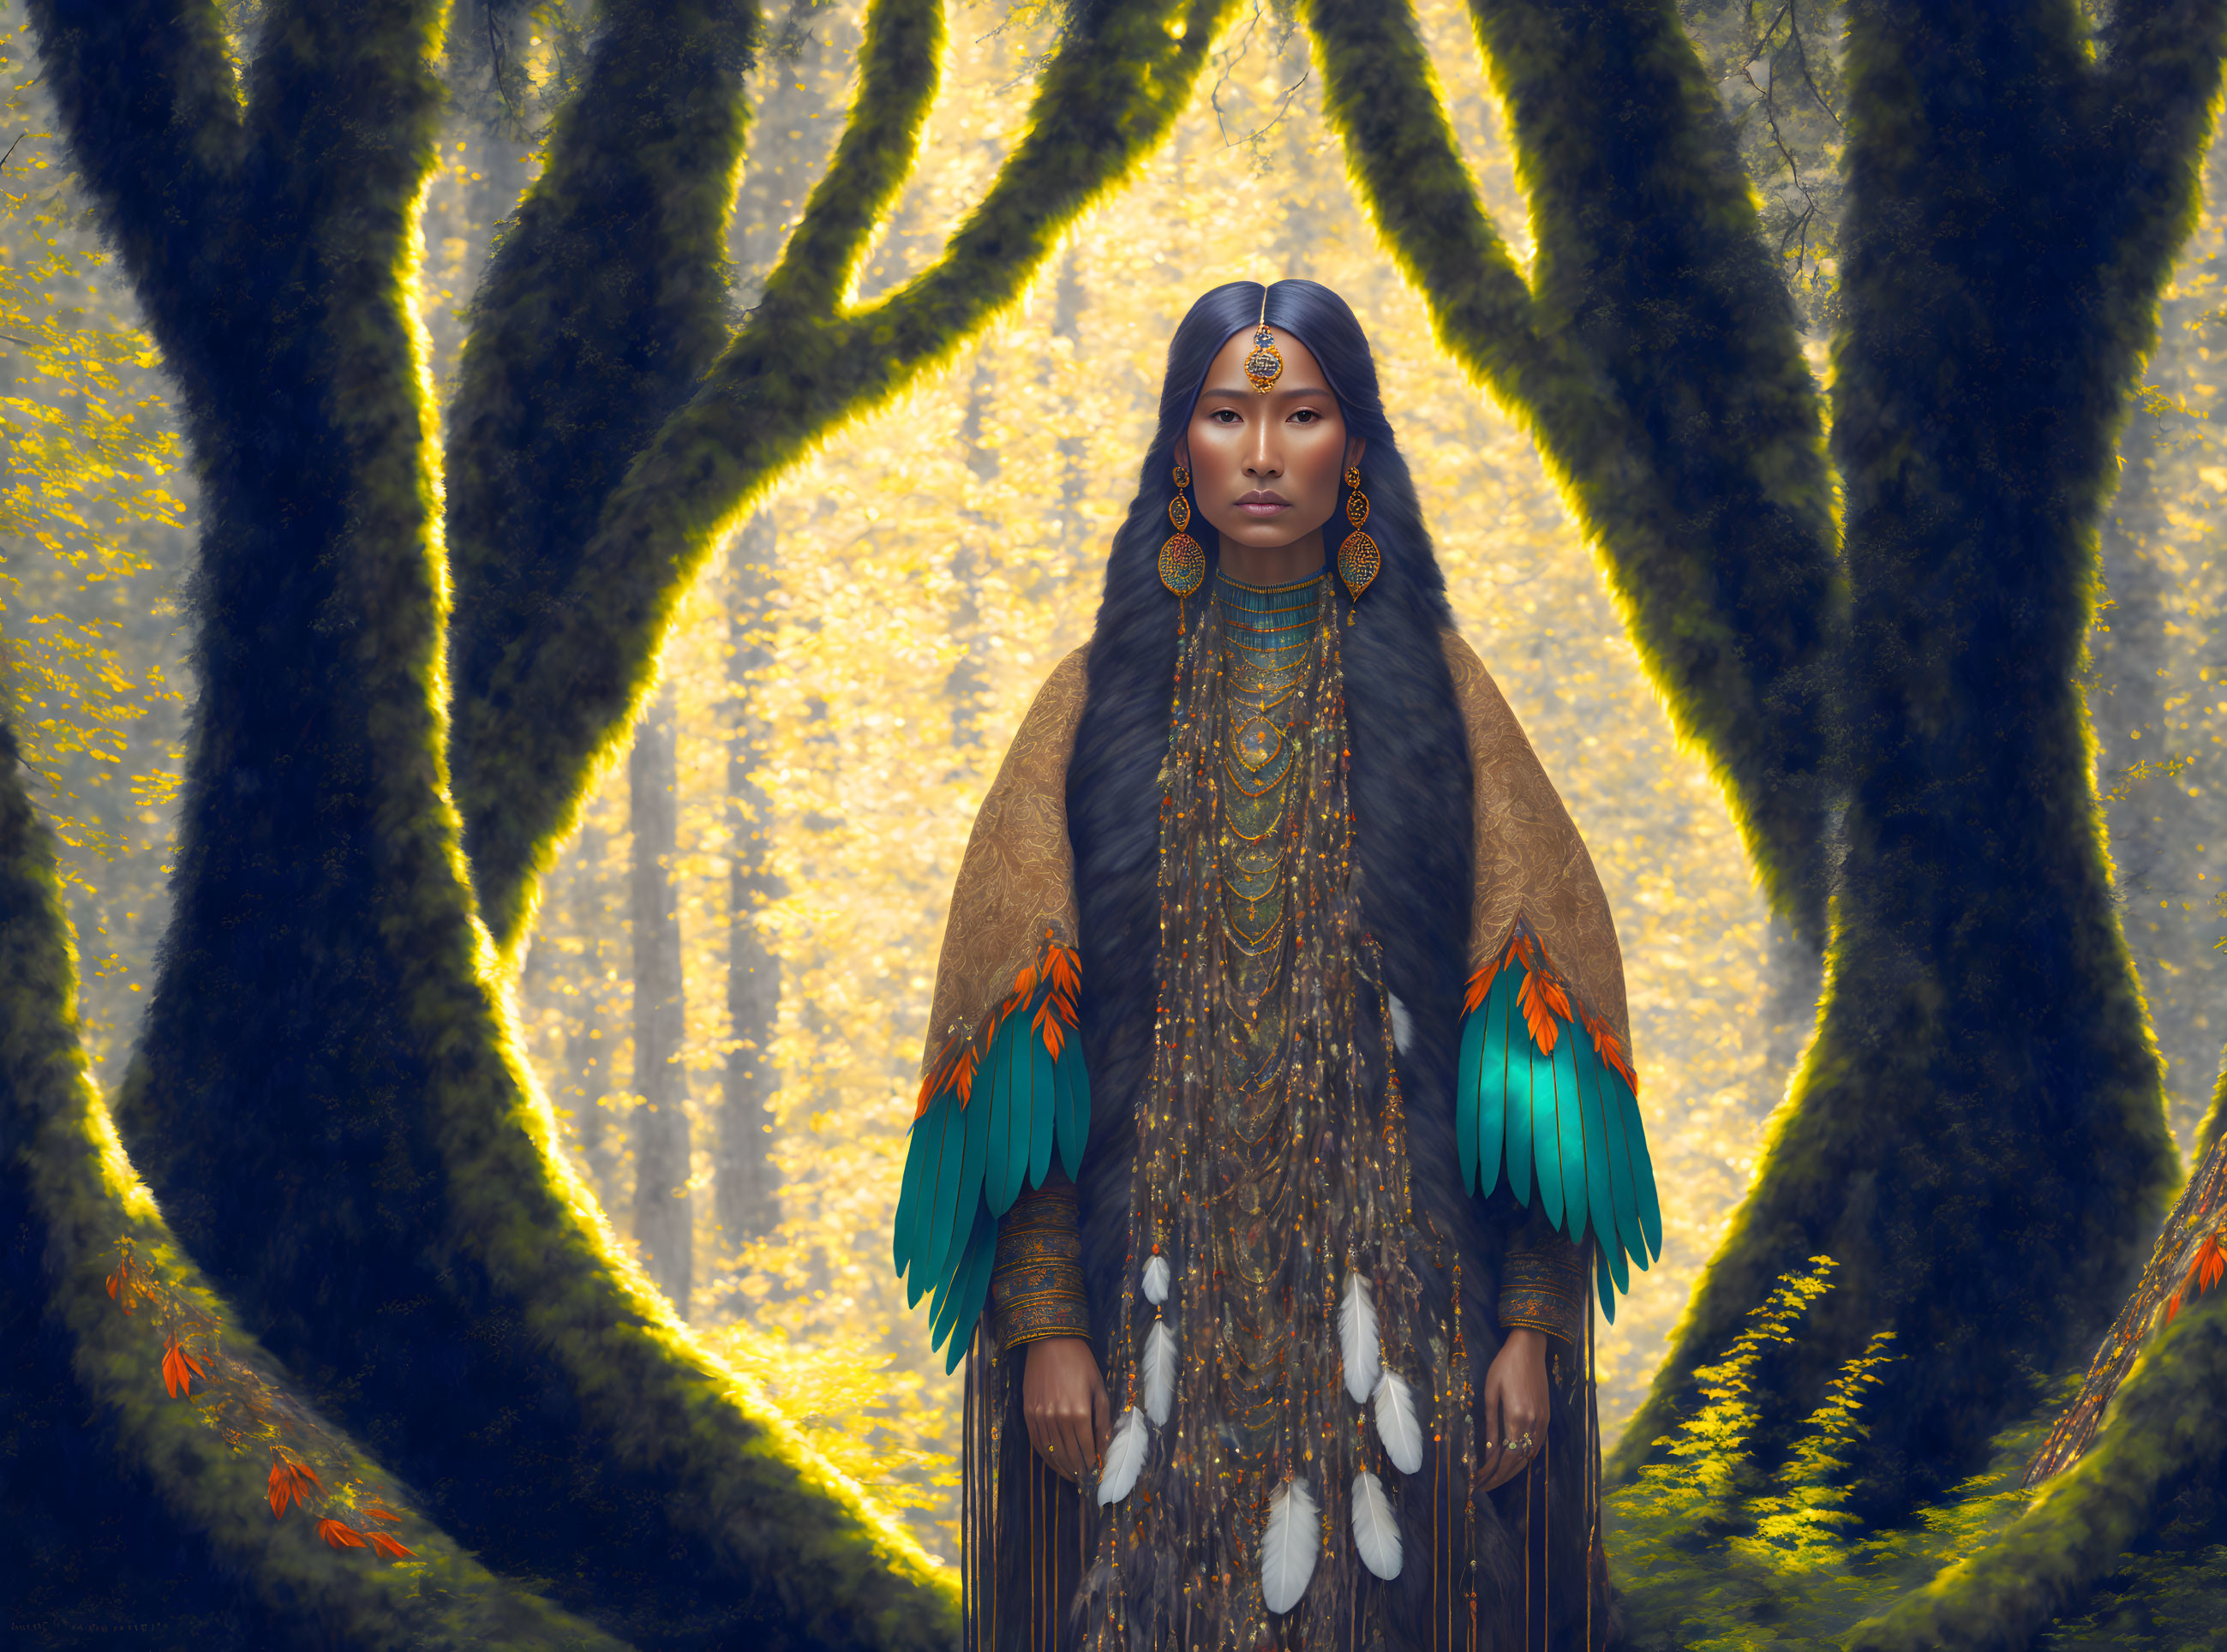 Woman in native attire surrounded by mystical forest and feather adornments